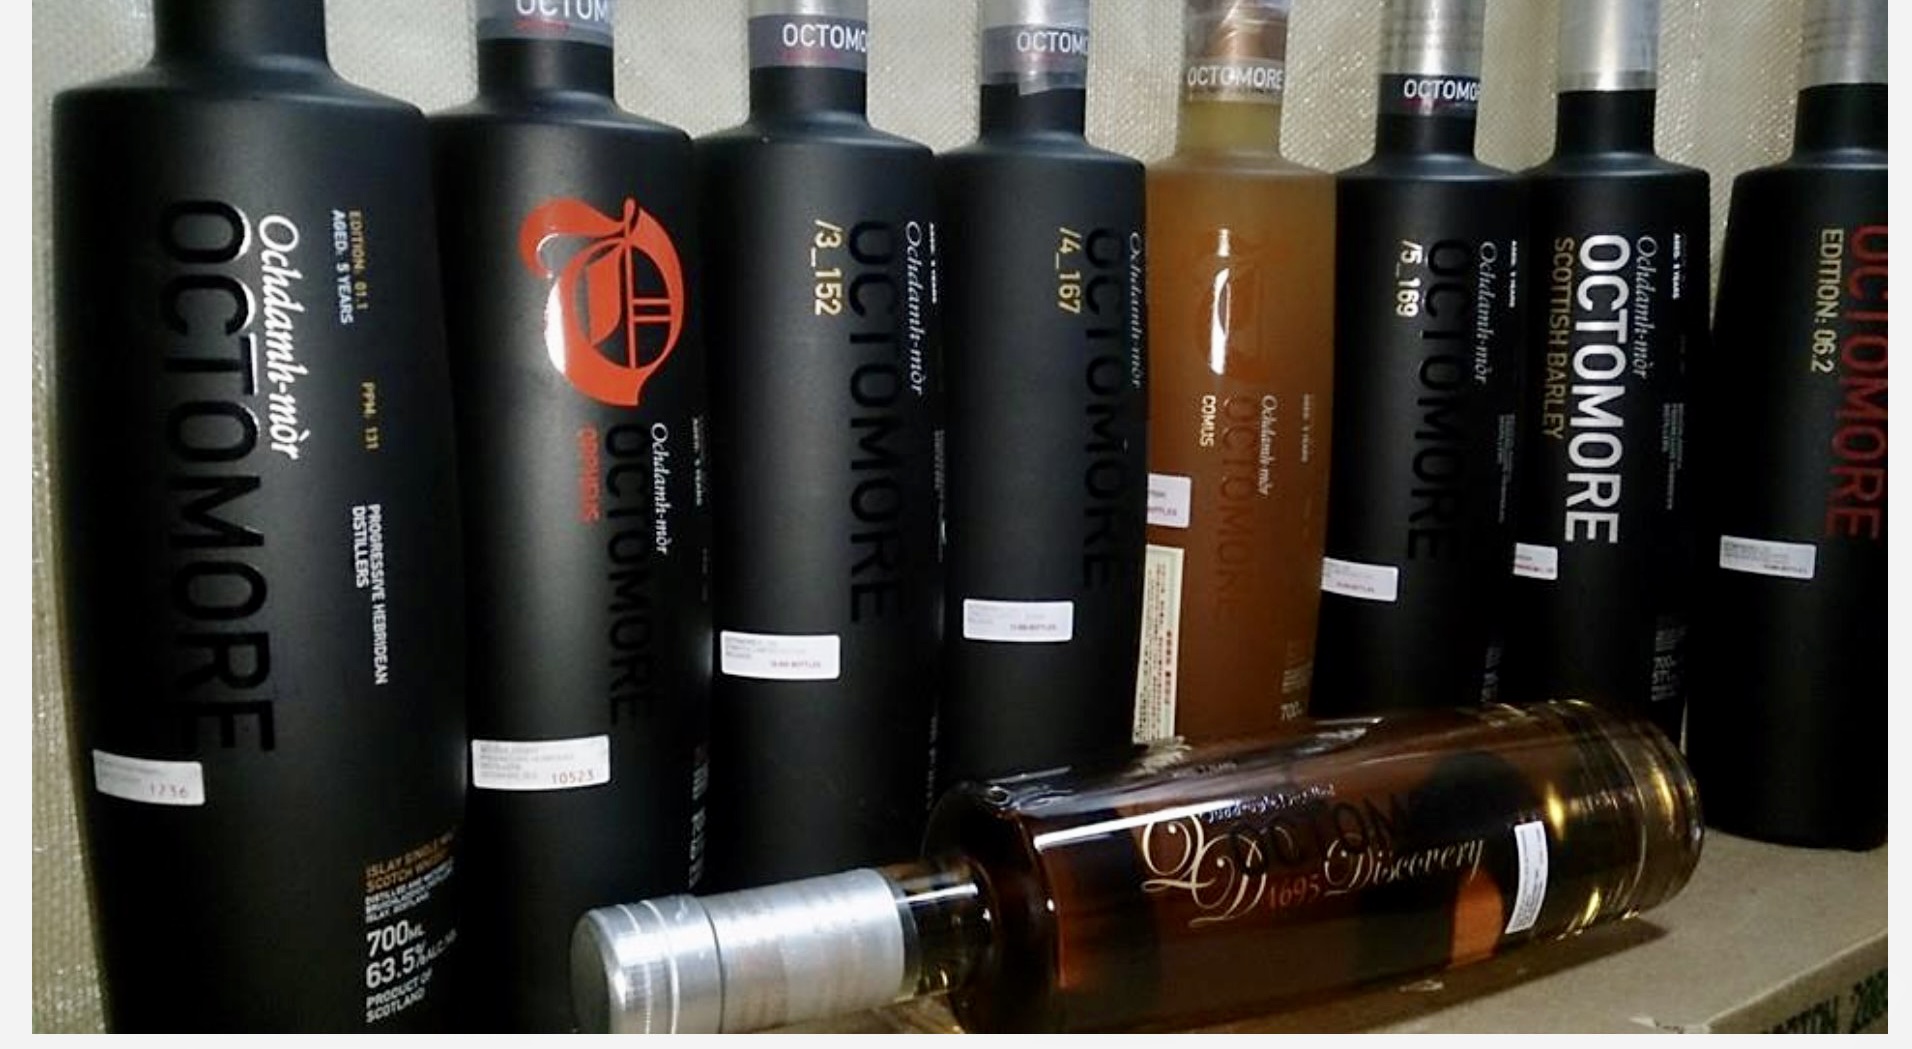 Octomore Collection